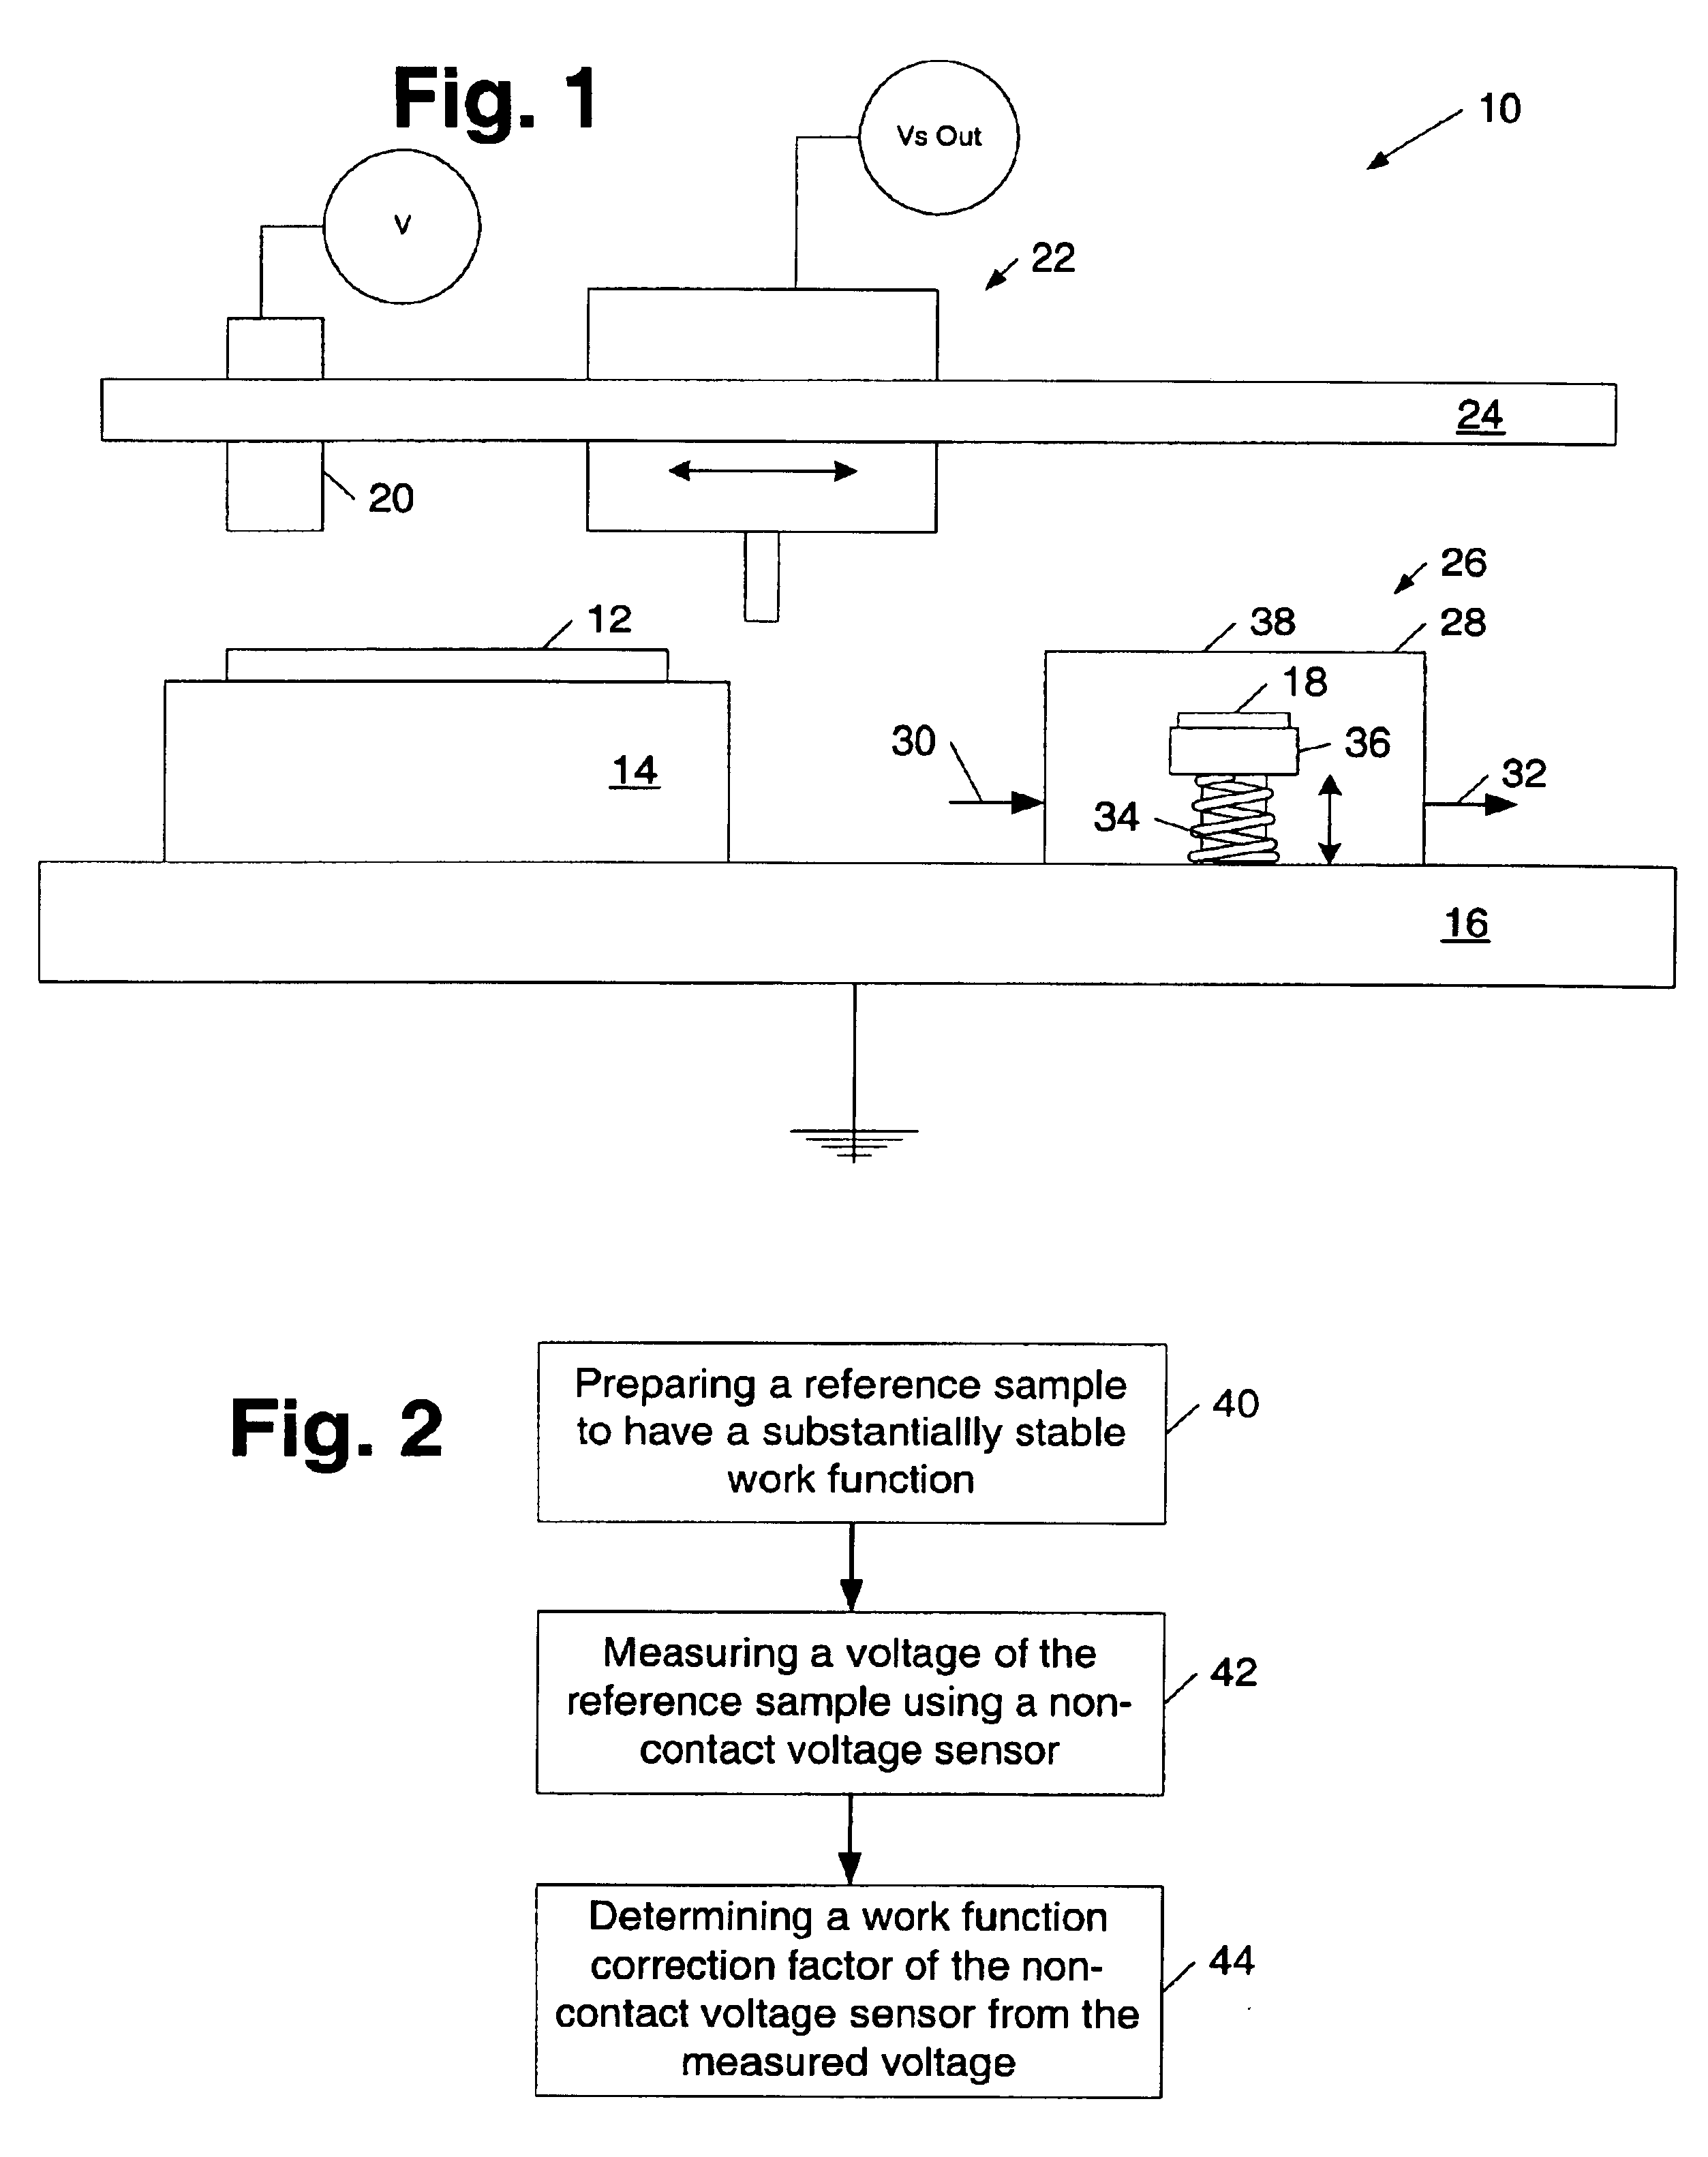 Systems and methods for using non-contact voltage sensors and corona discharge guns